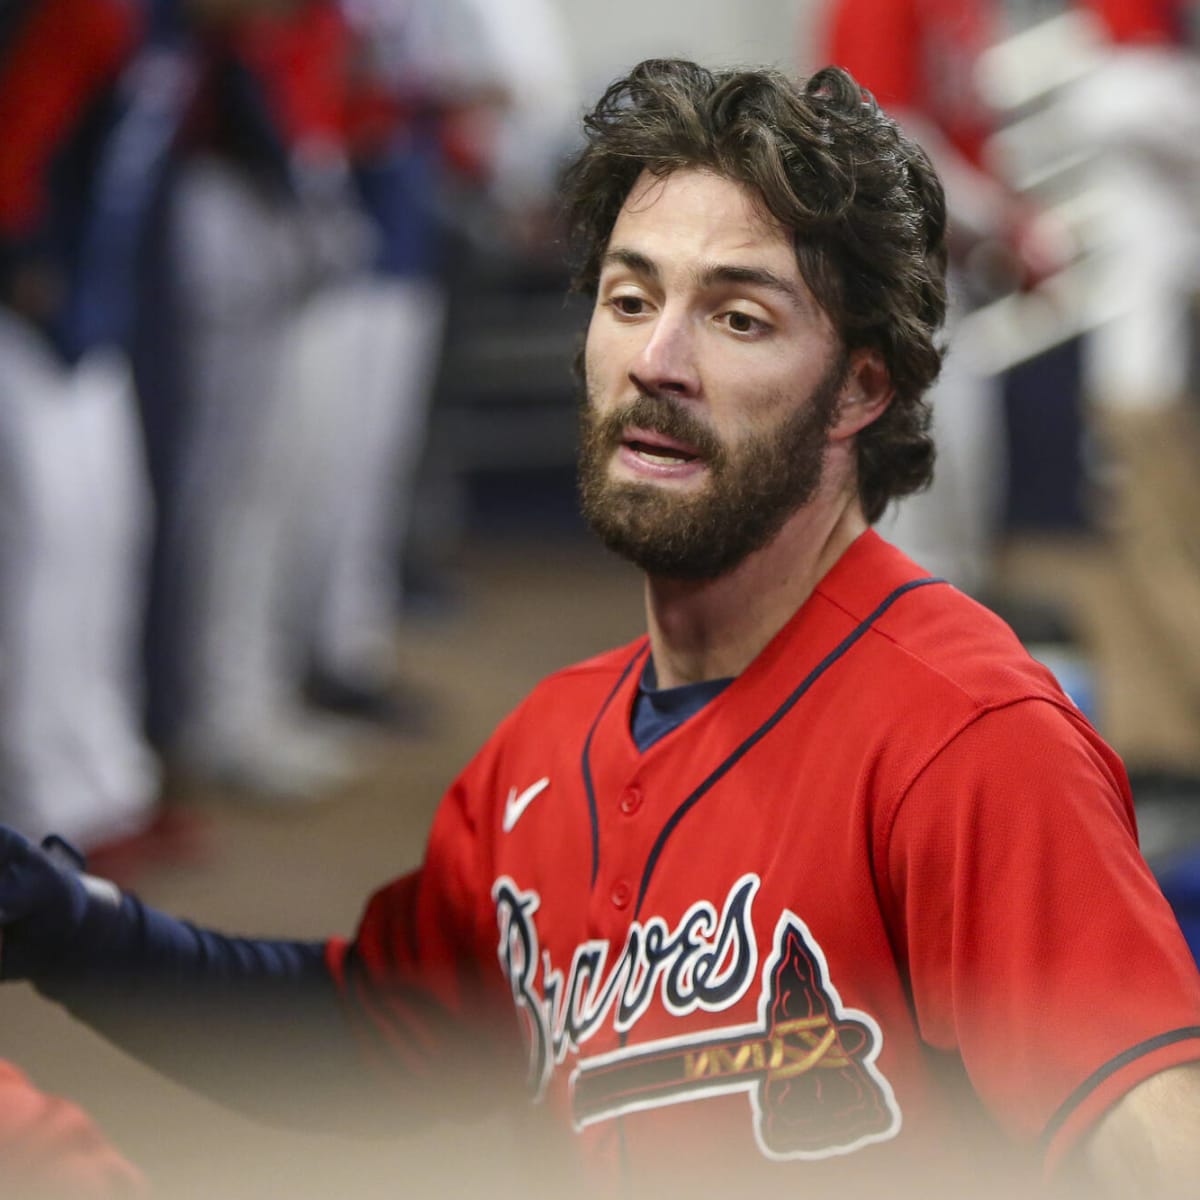 Atlanta Braves should sign Jacob deGrom and not Dansby Swanson